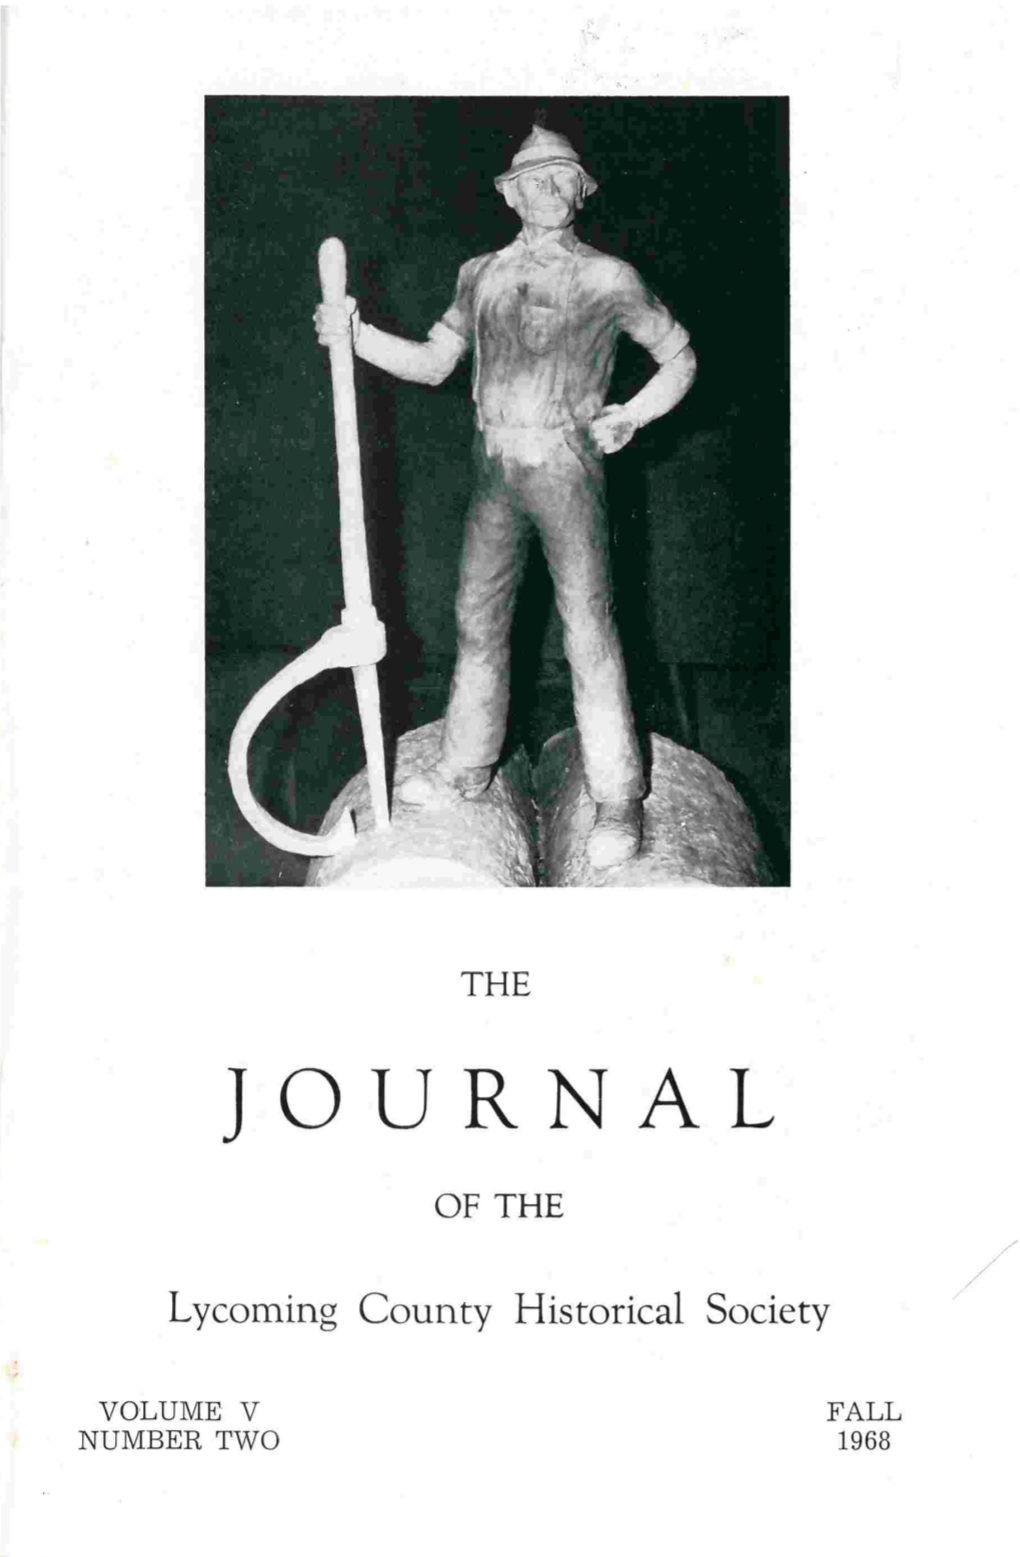 Journal of the Lycoming County Historical Society, Fall 1968